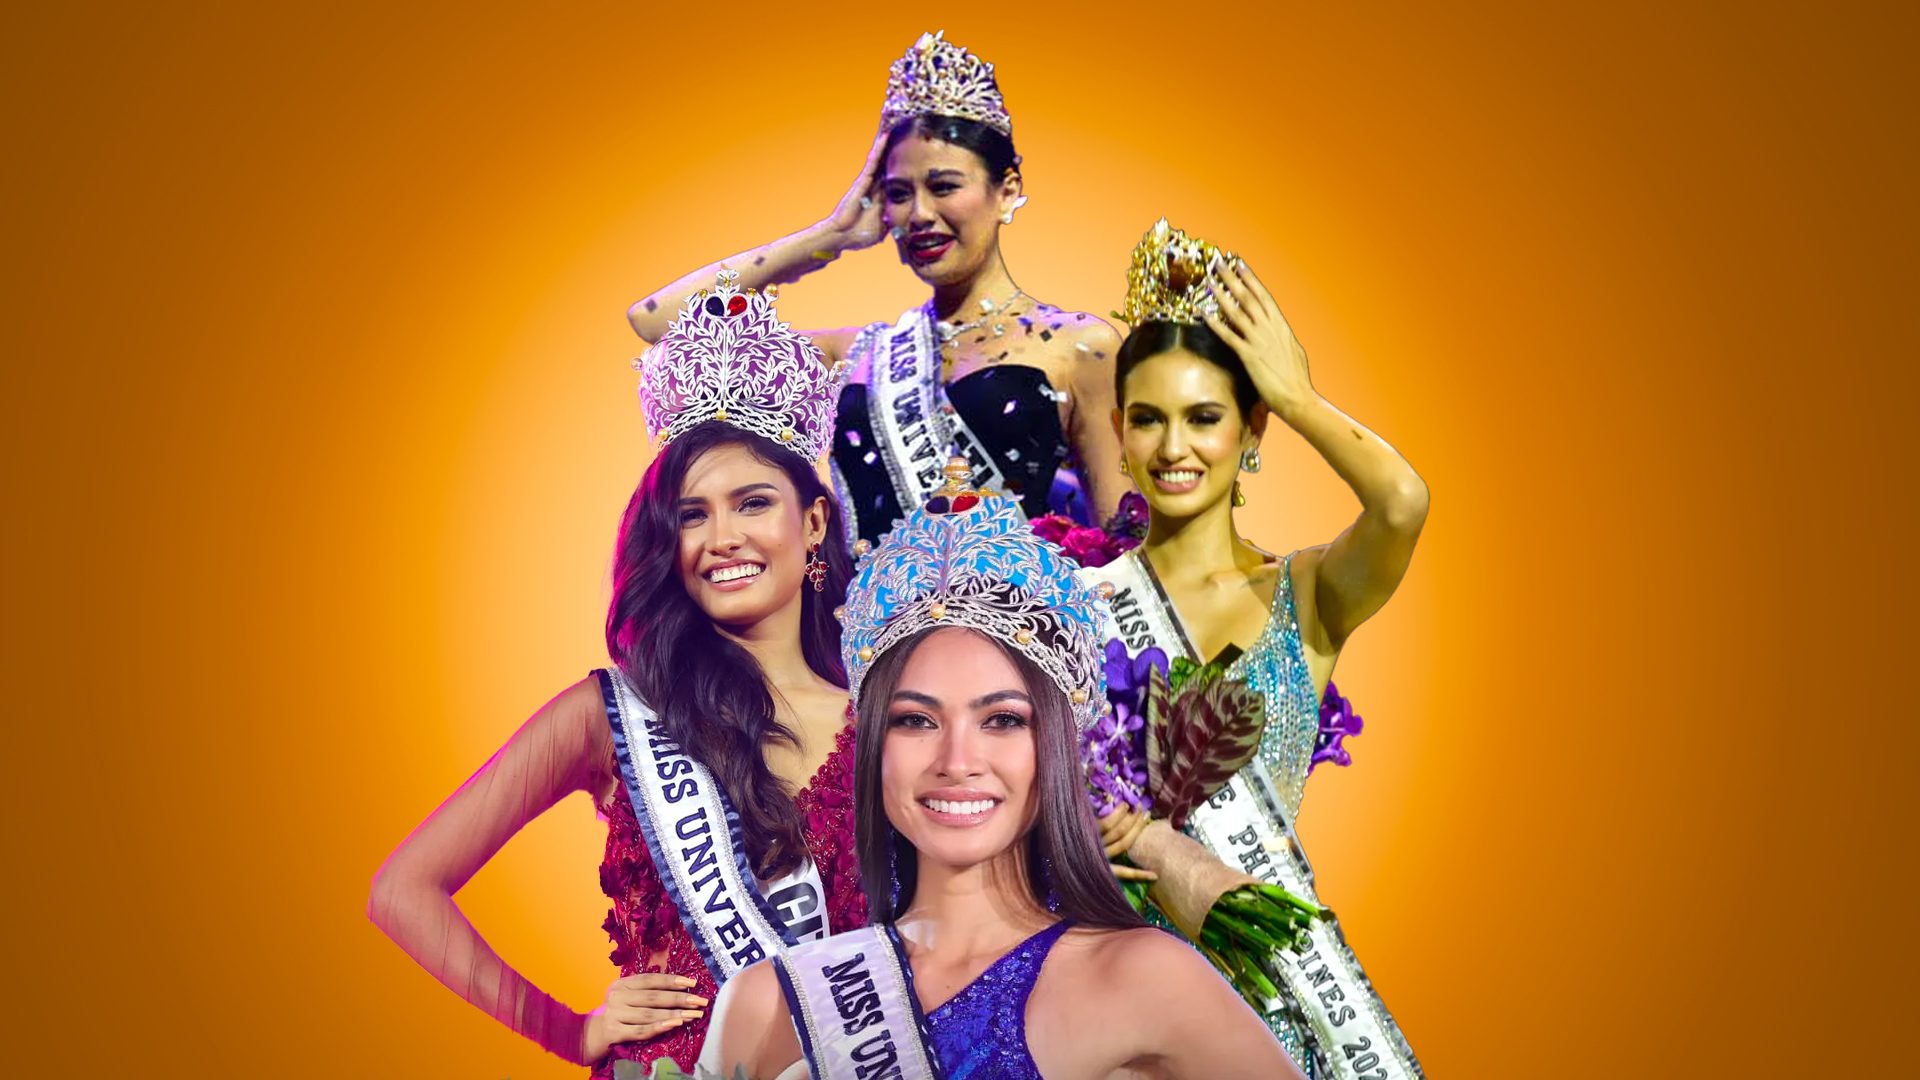 Here’s a rundown of changes to the Miss Universe Philippines pageant since 2020